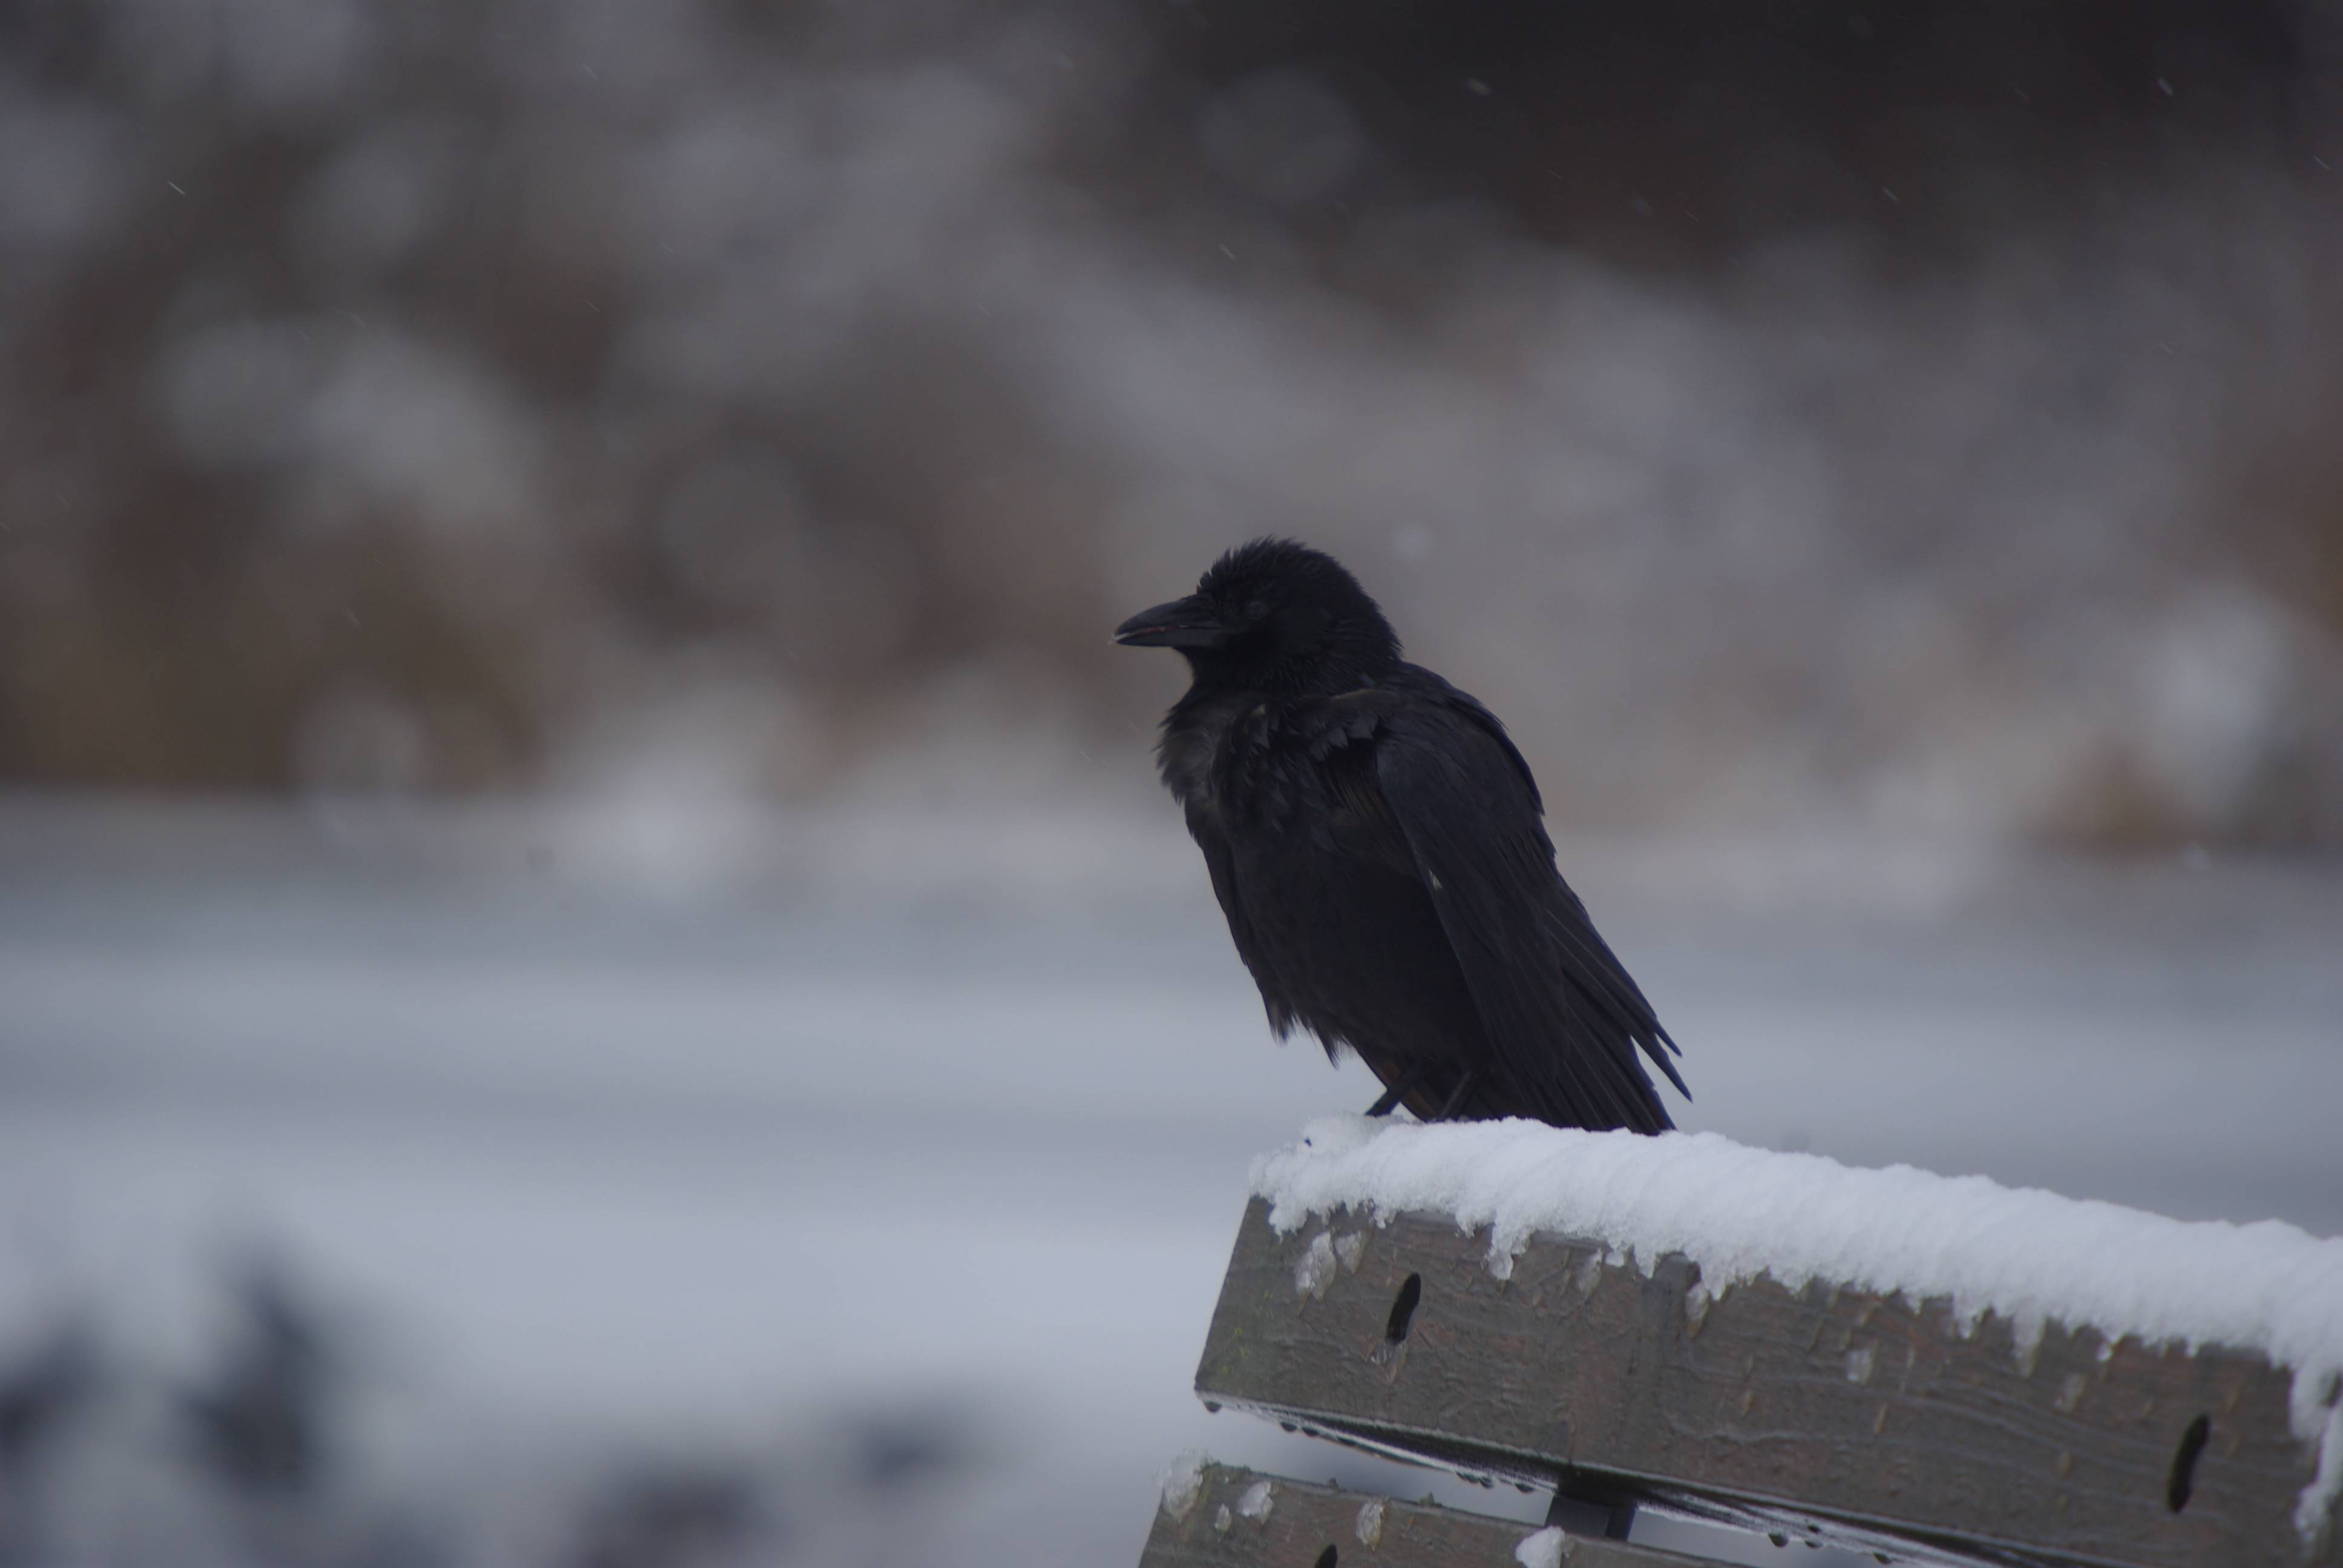 Raven winter birds wallpaper - (#18075) - High Quality and ...